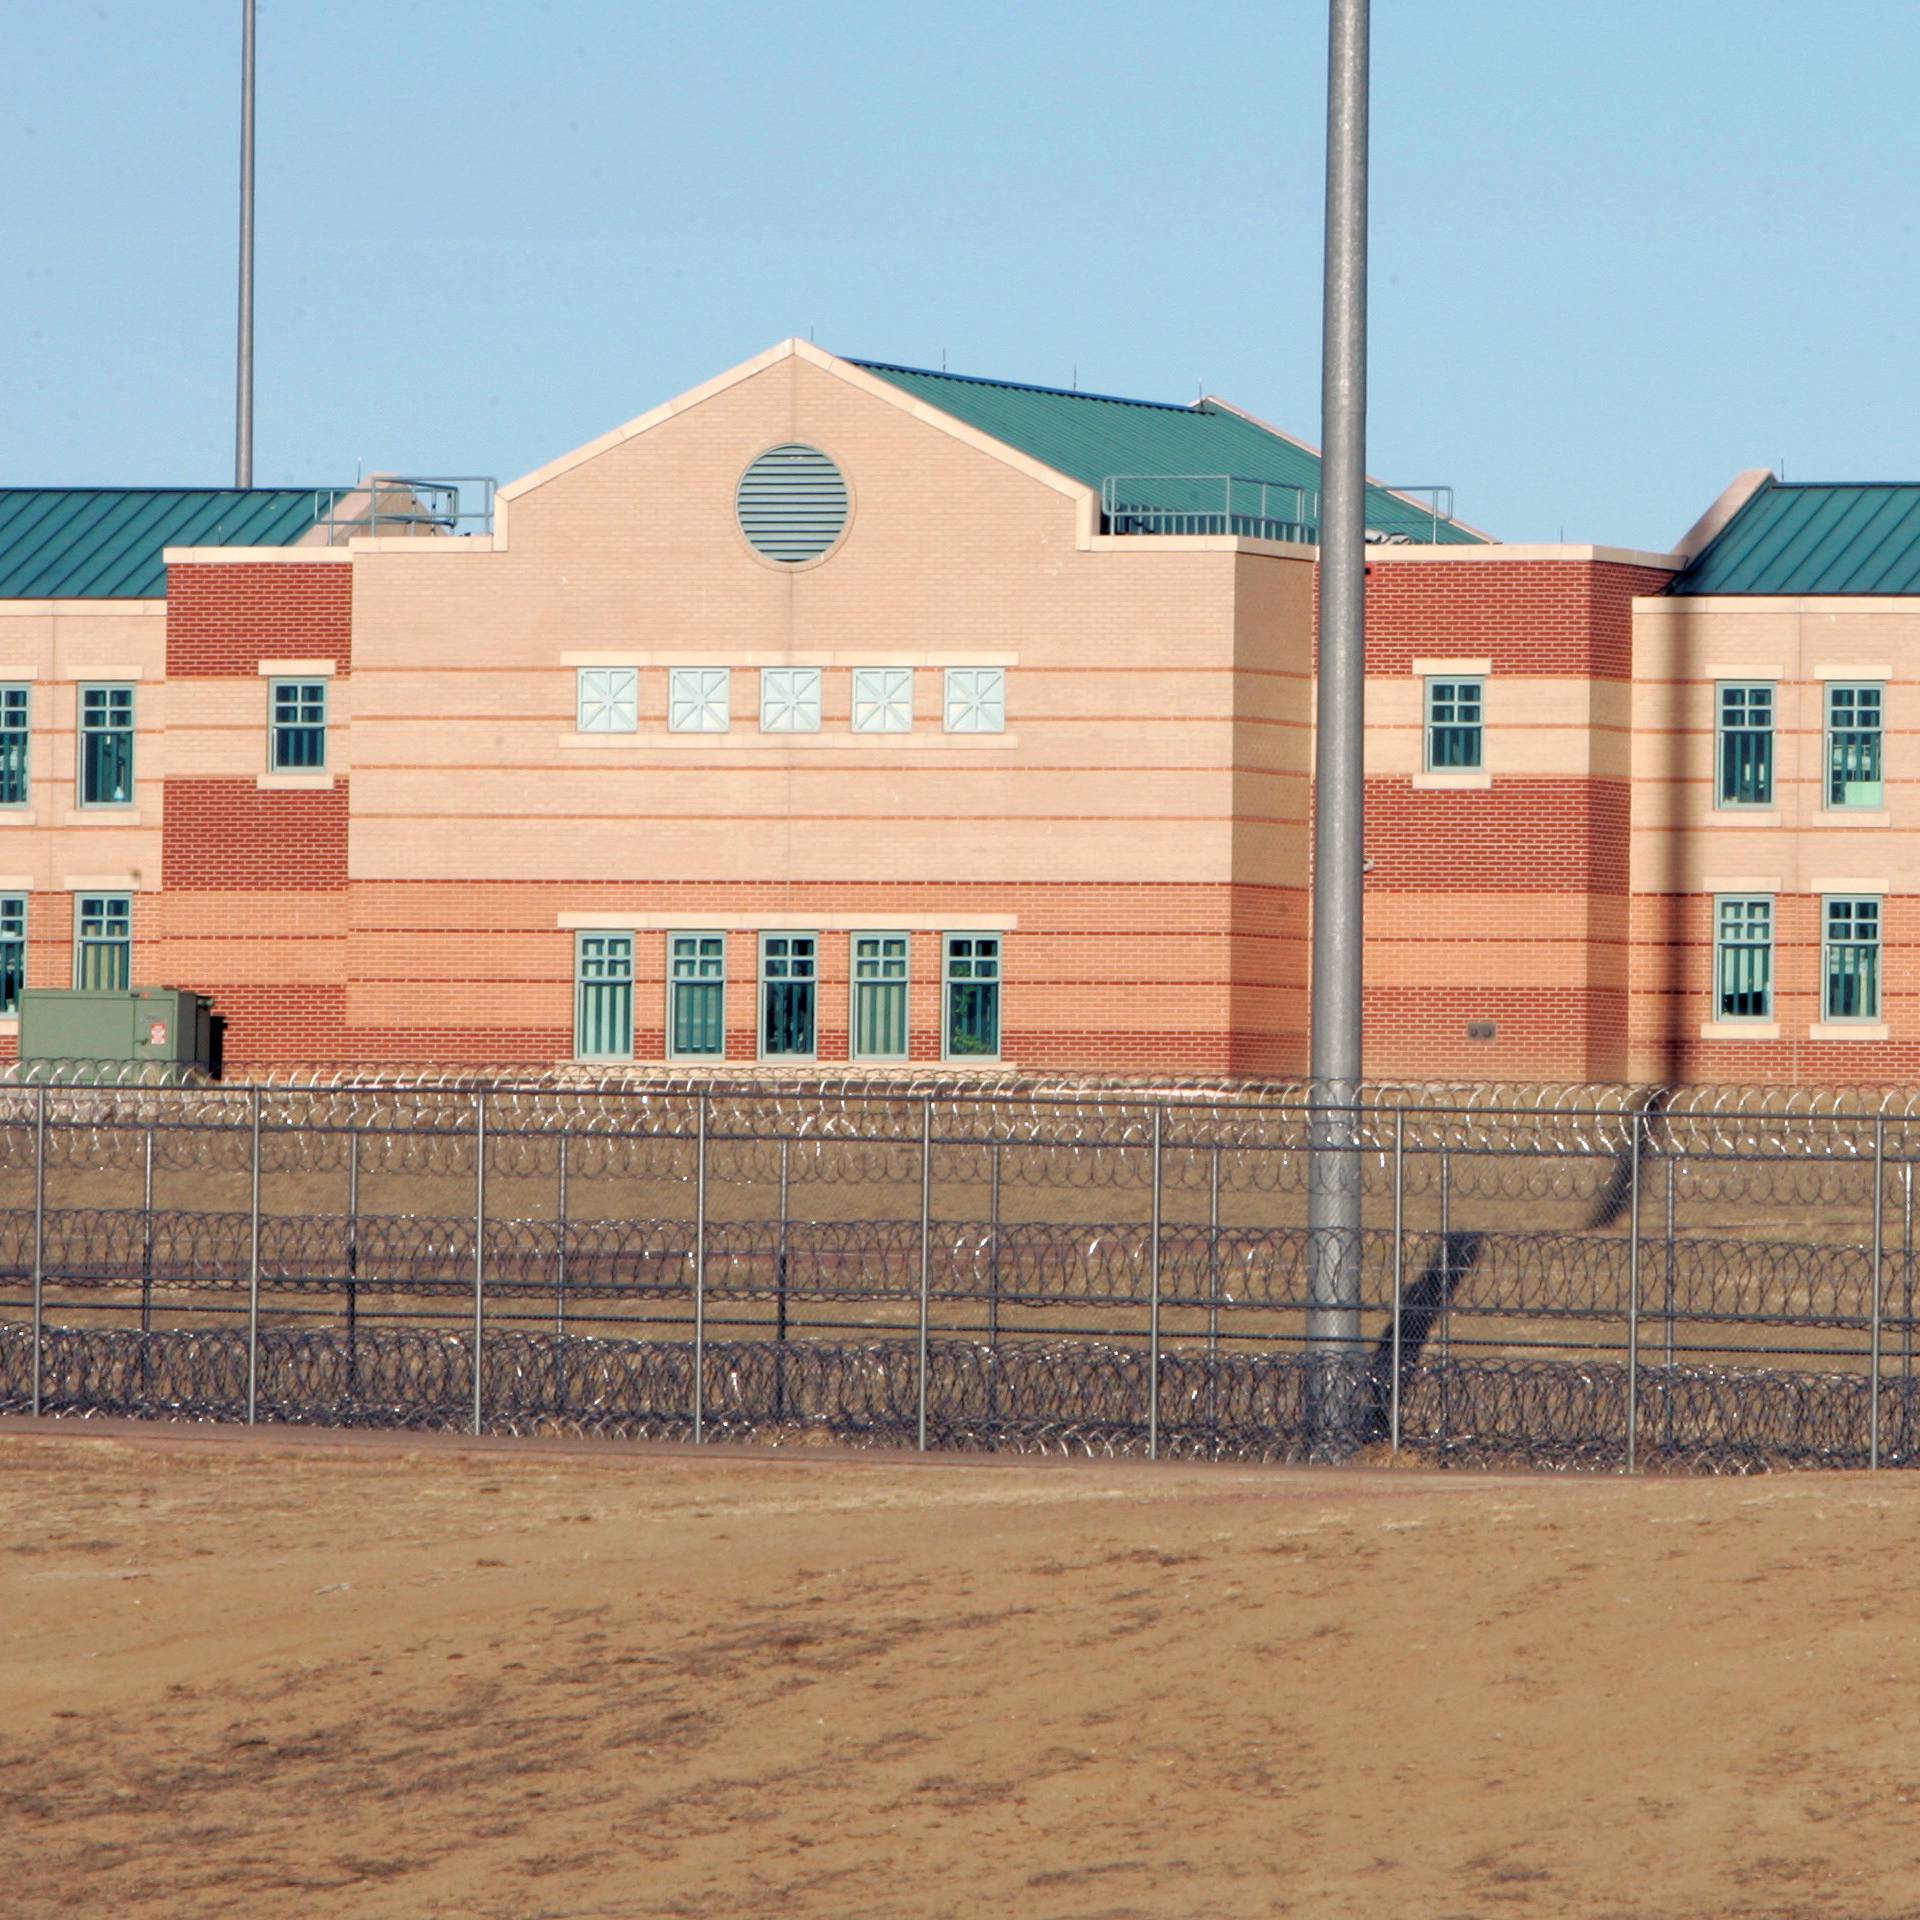 FILE PHOTO: The Federal Correctional Complex including the Administrative Maximum Penitentiary or "Supermax" prison in Florence